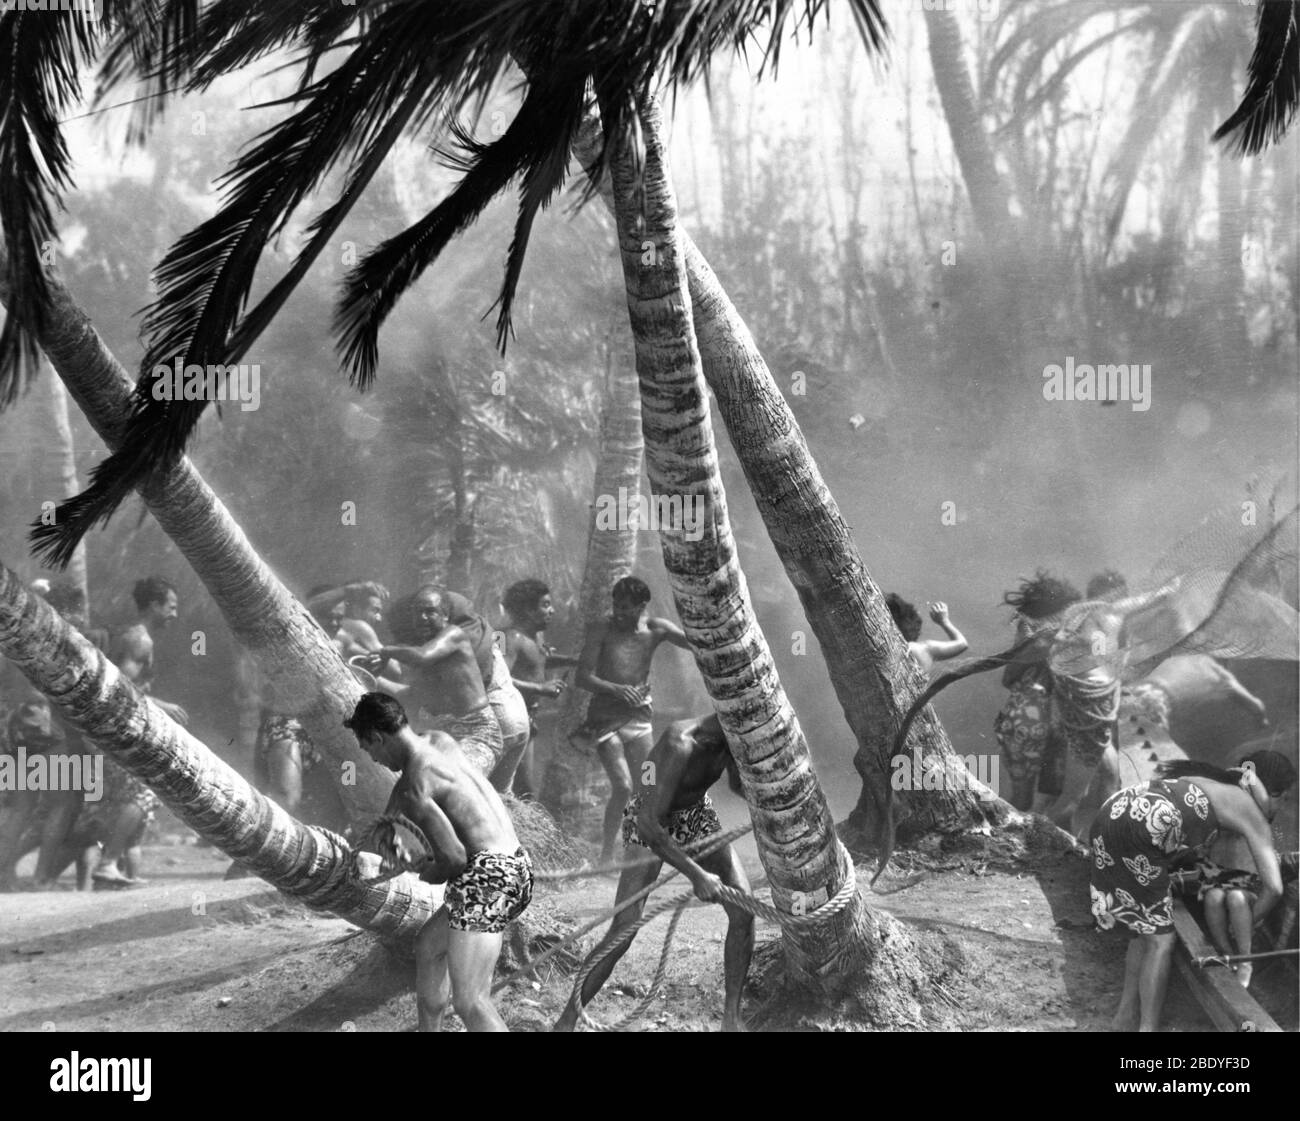 Native Islanders battling the storm in THE HURRICANE 1937 director JOHN FORD  novel Charles Nordhoff and James Norman Hall special effects James Basevi The Samuel Goldwyn Company / United Artists Stock Photo